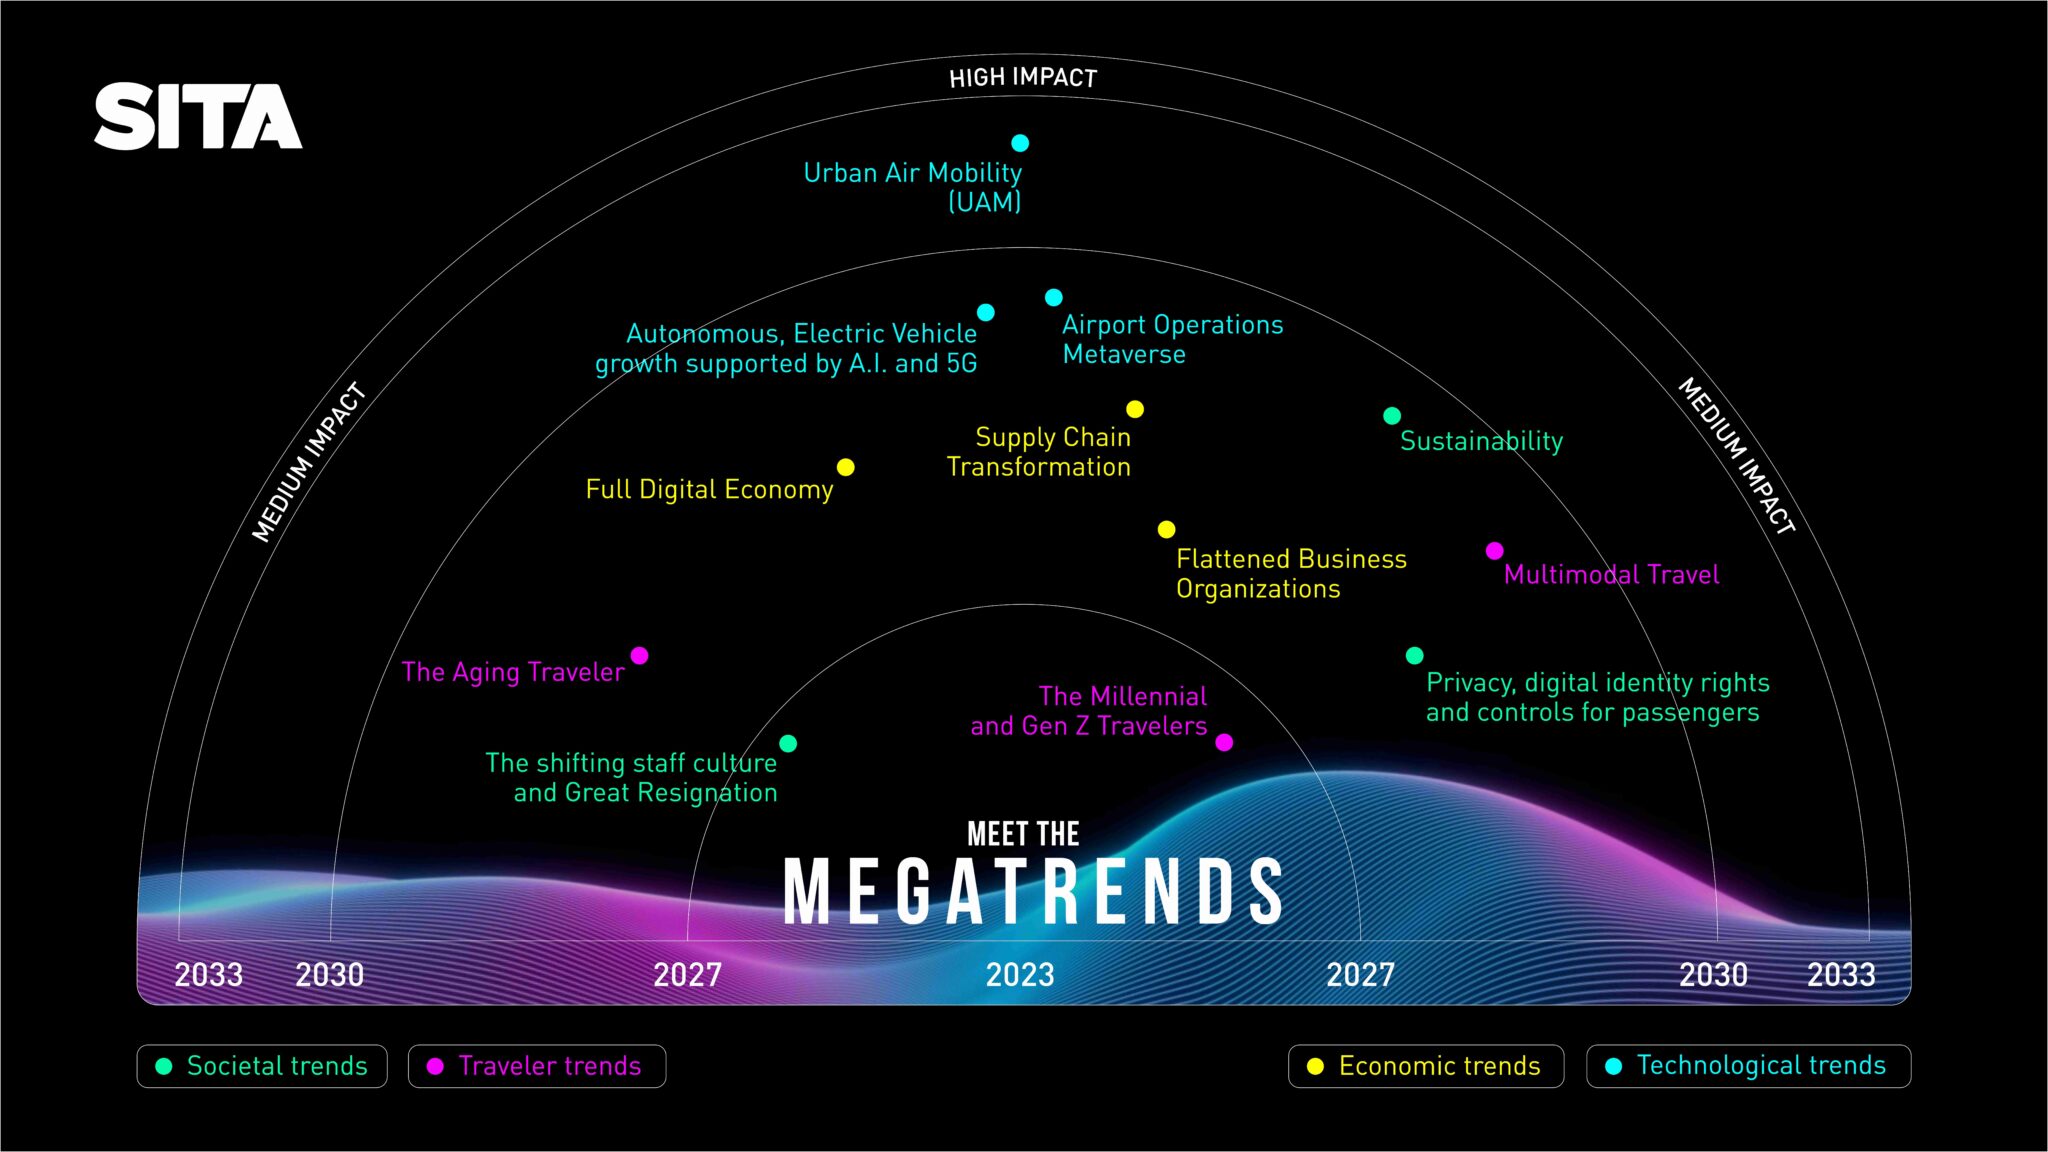 Travel trends from ‘Meet the Megatrends’ report by SITA